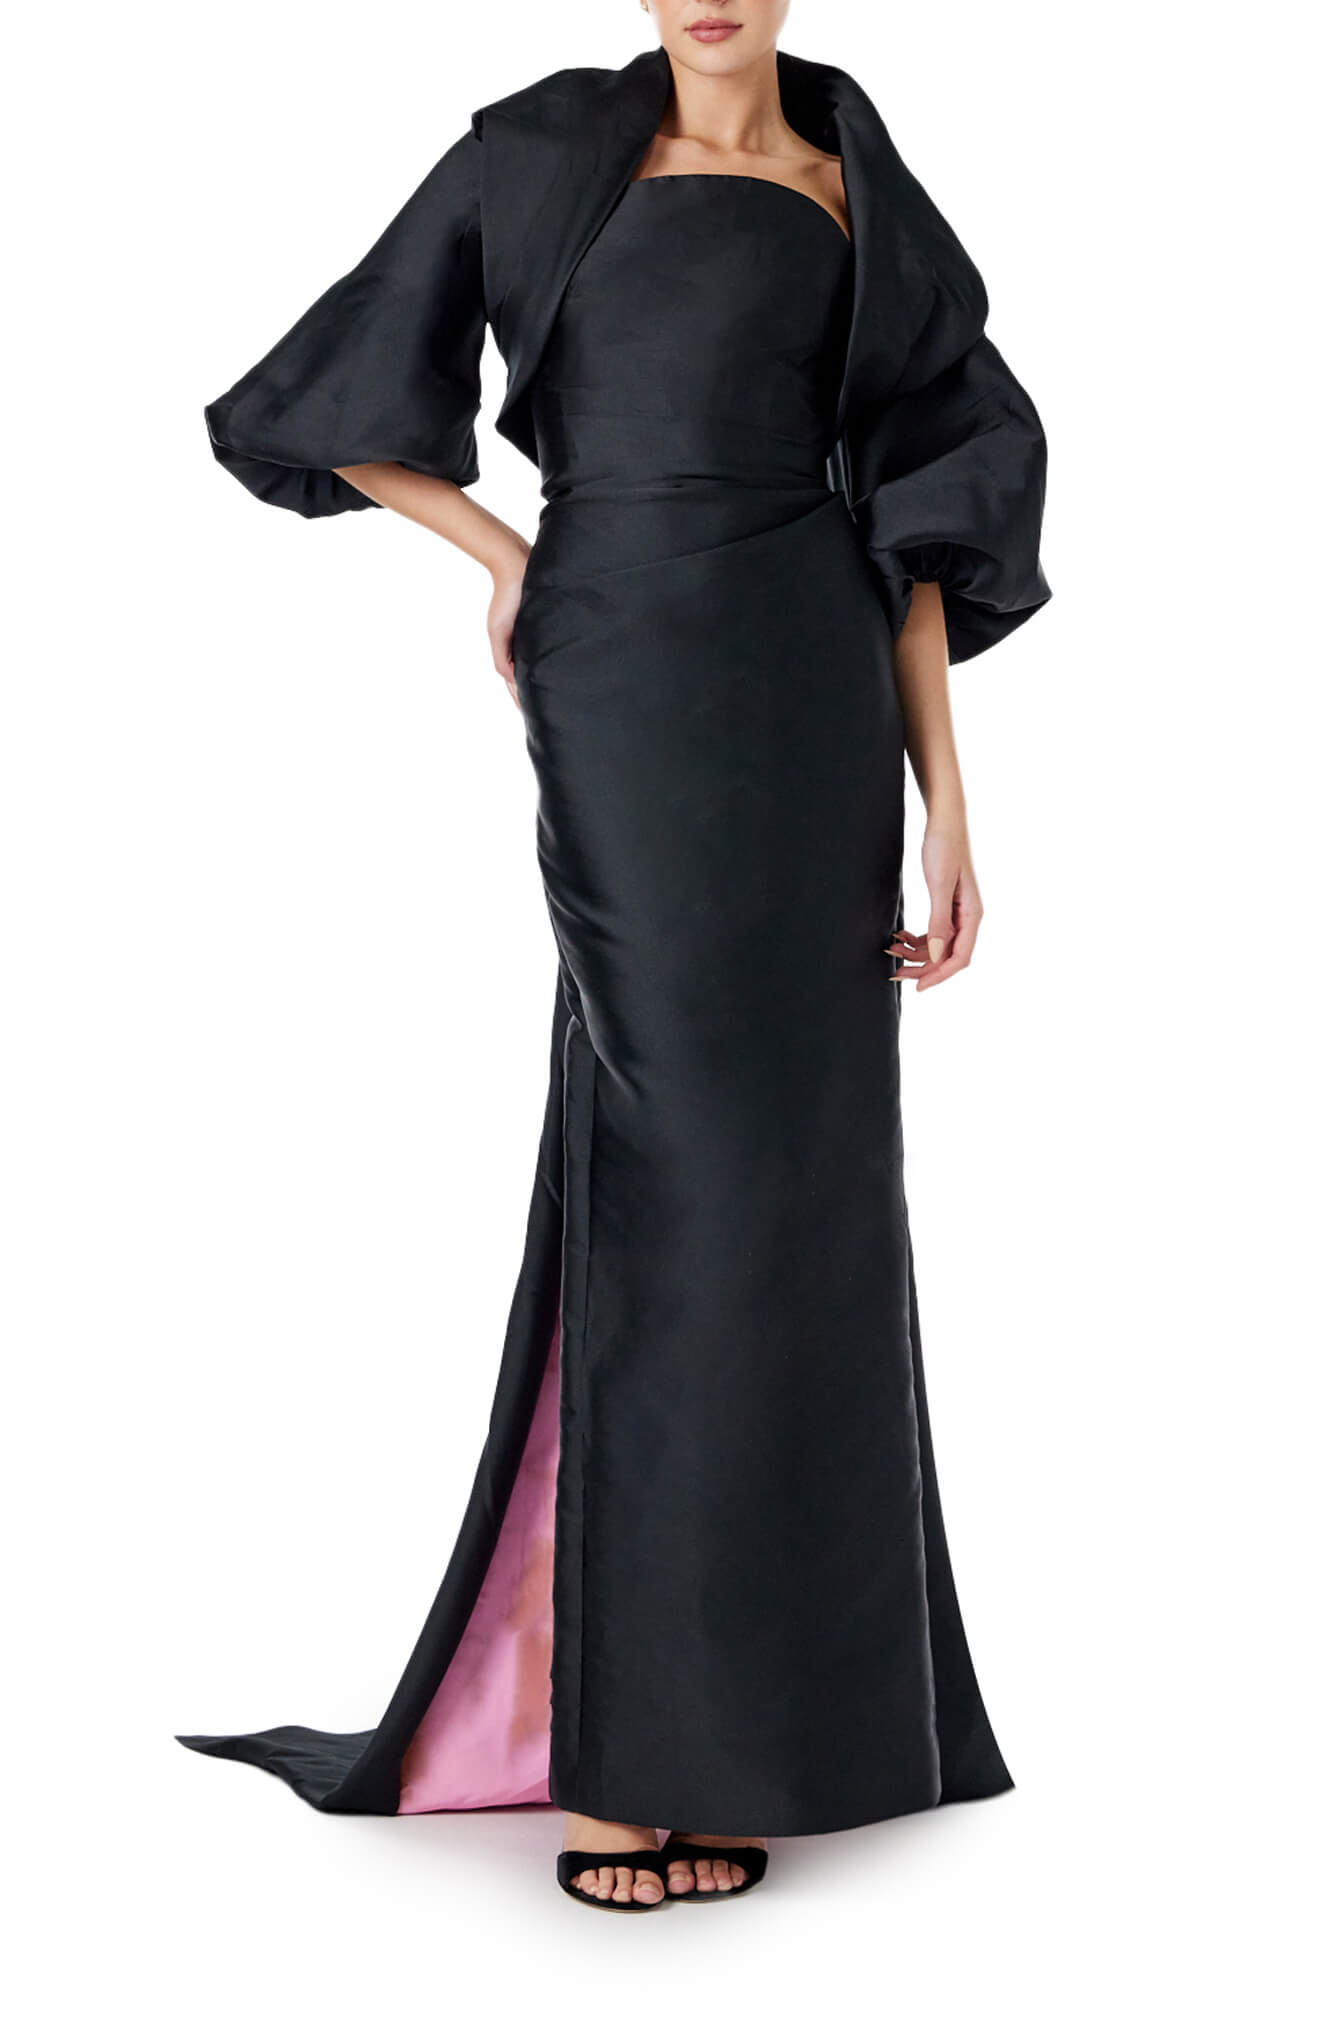 Monique Lhuillier strapless column gown in black silk faille with pink bi-color train and black faille cocoon evening jacket.